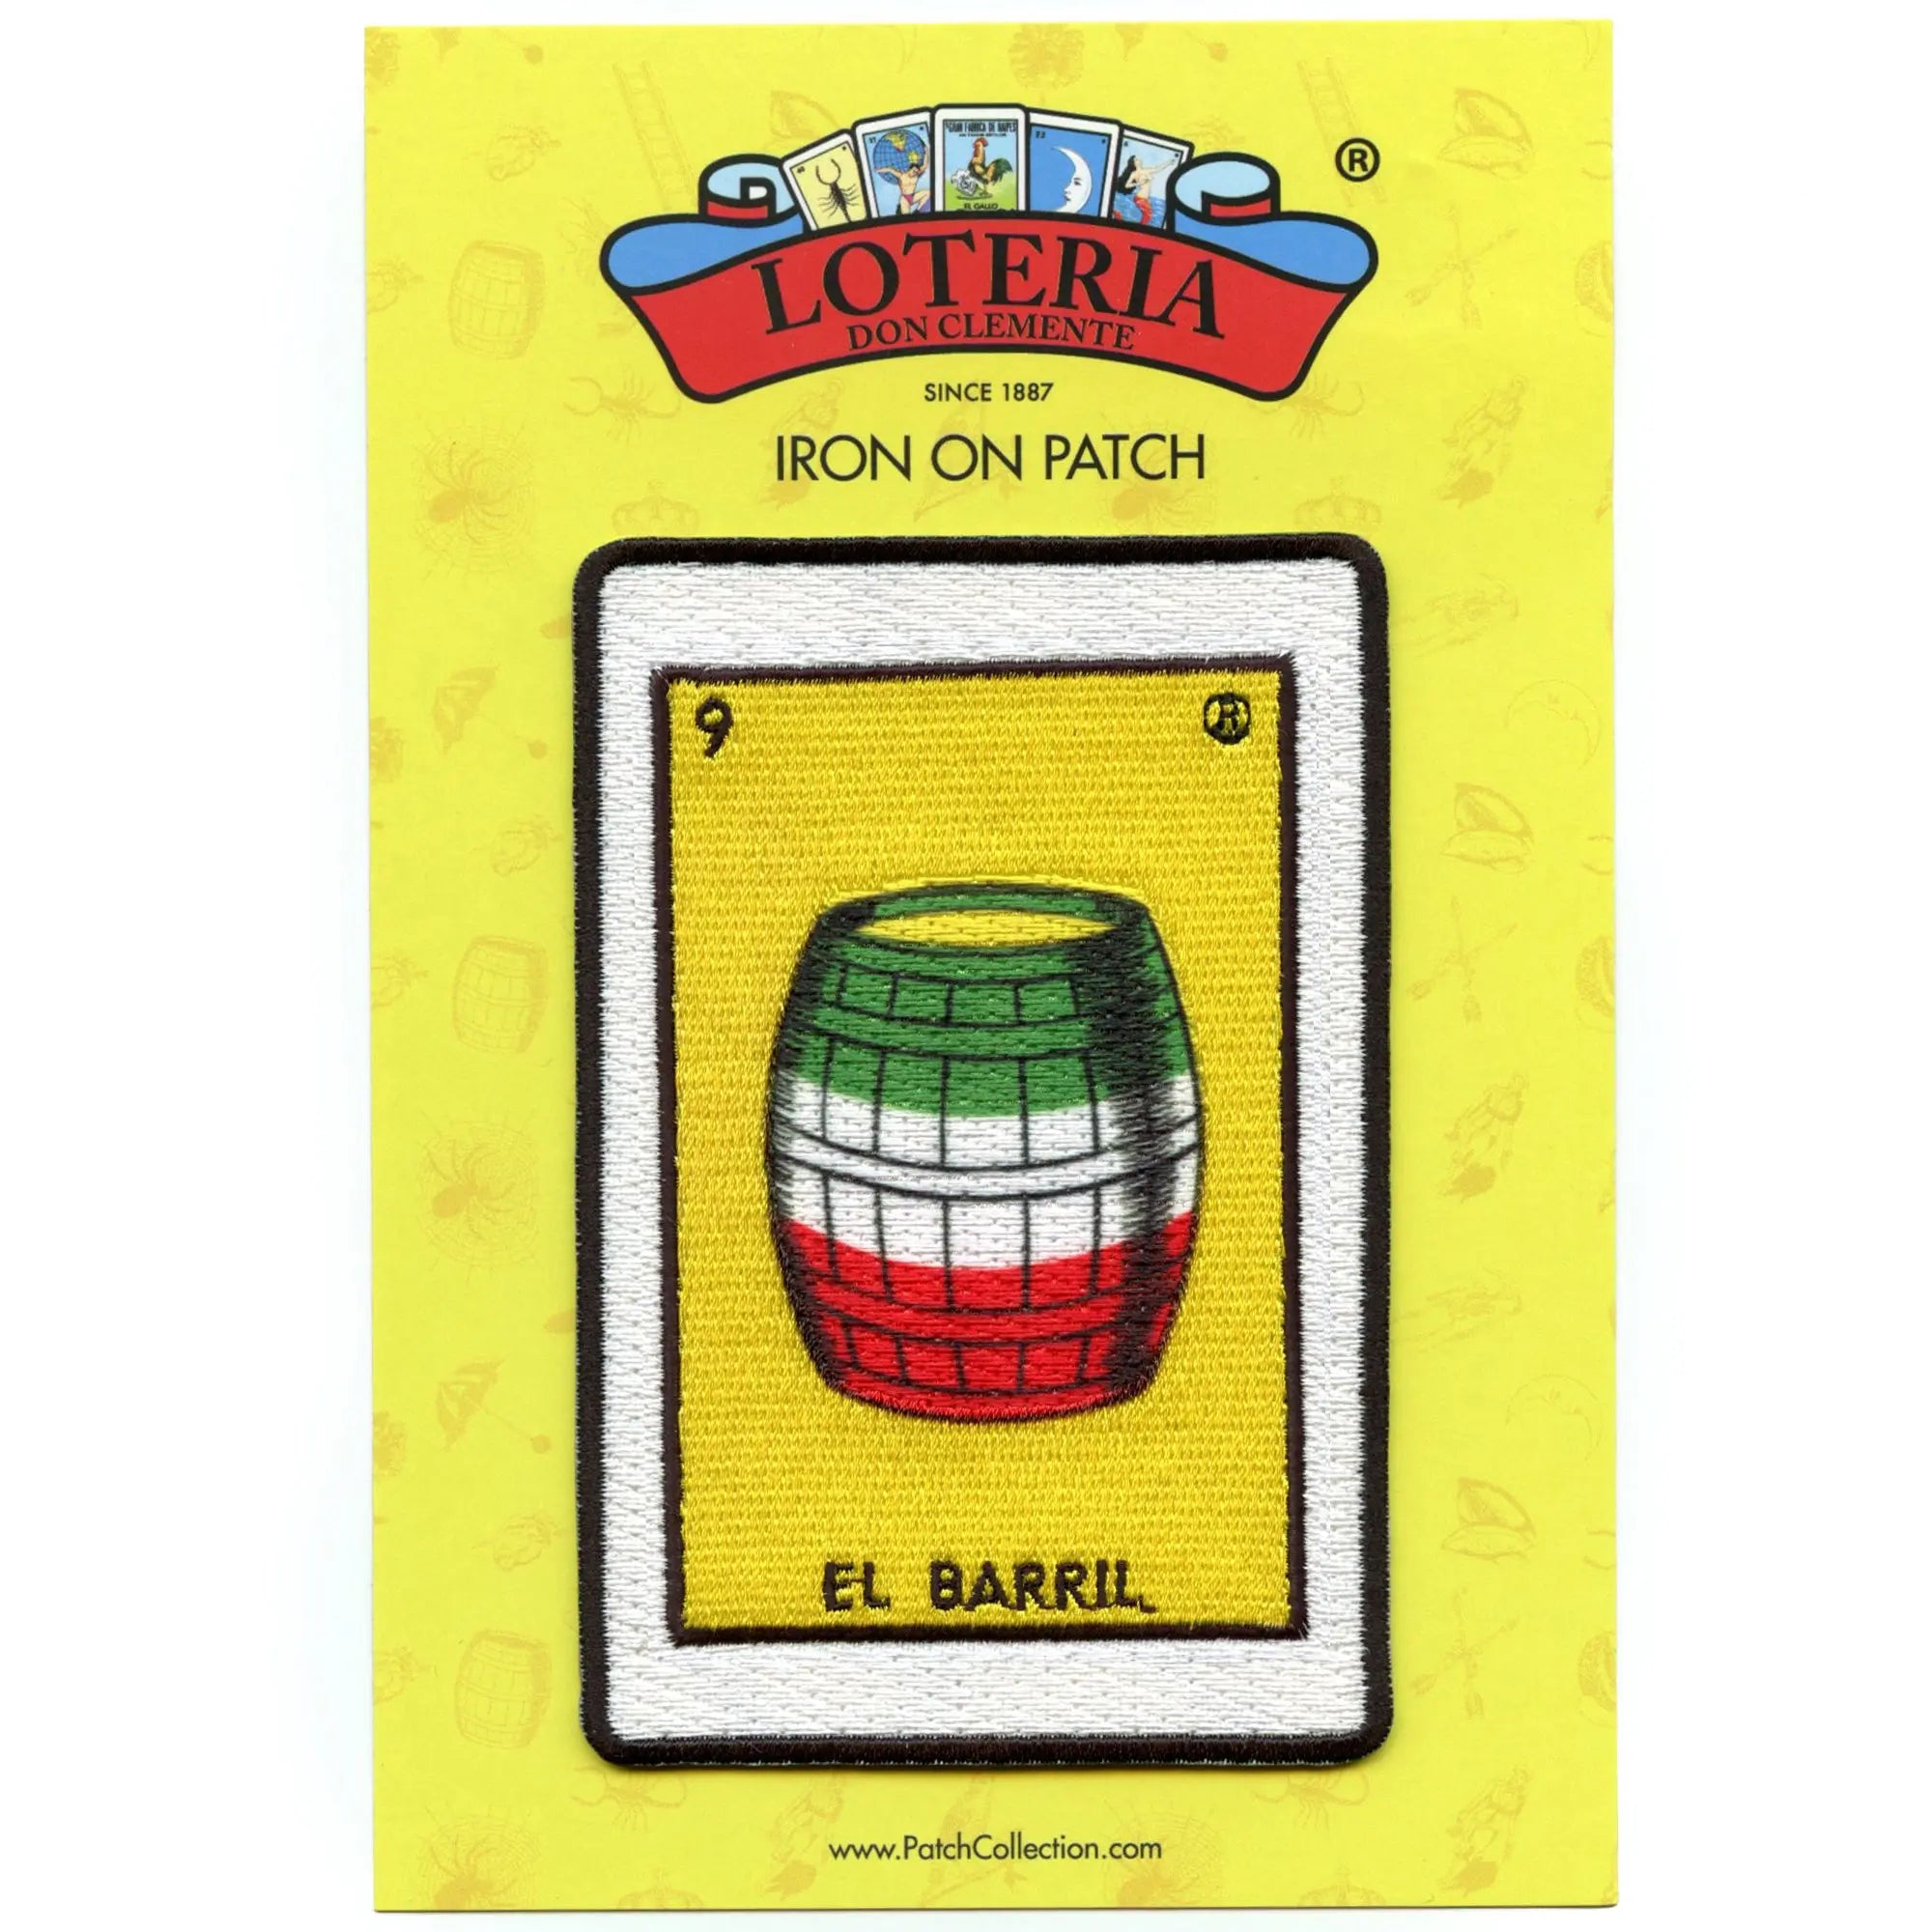 El Barril 9 Patch Mexican Loteria Card Sublimated Embroidery Iron On Patch Collection